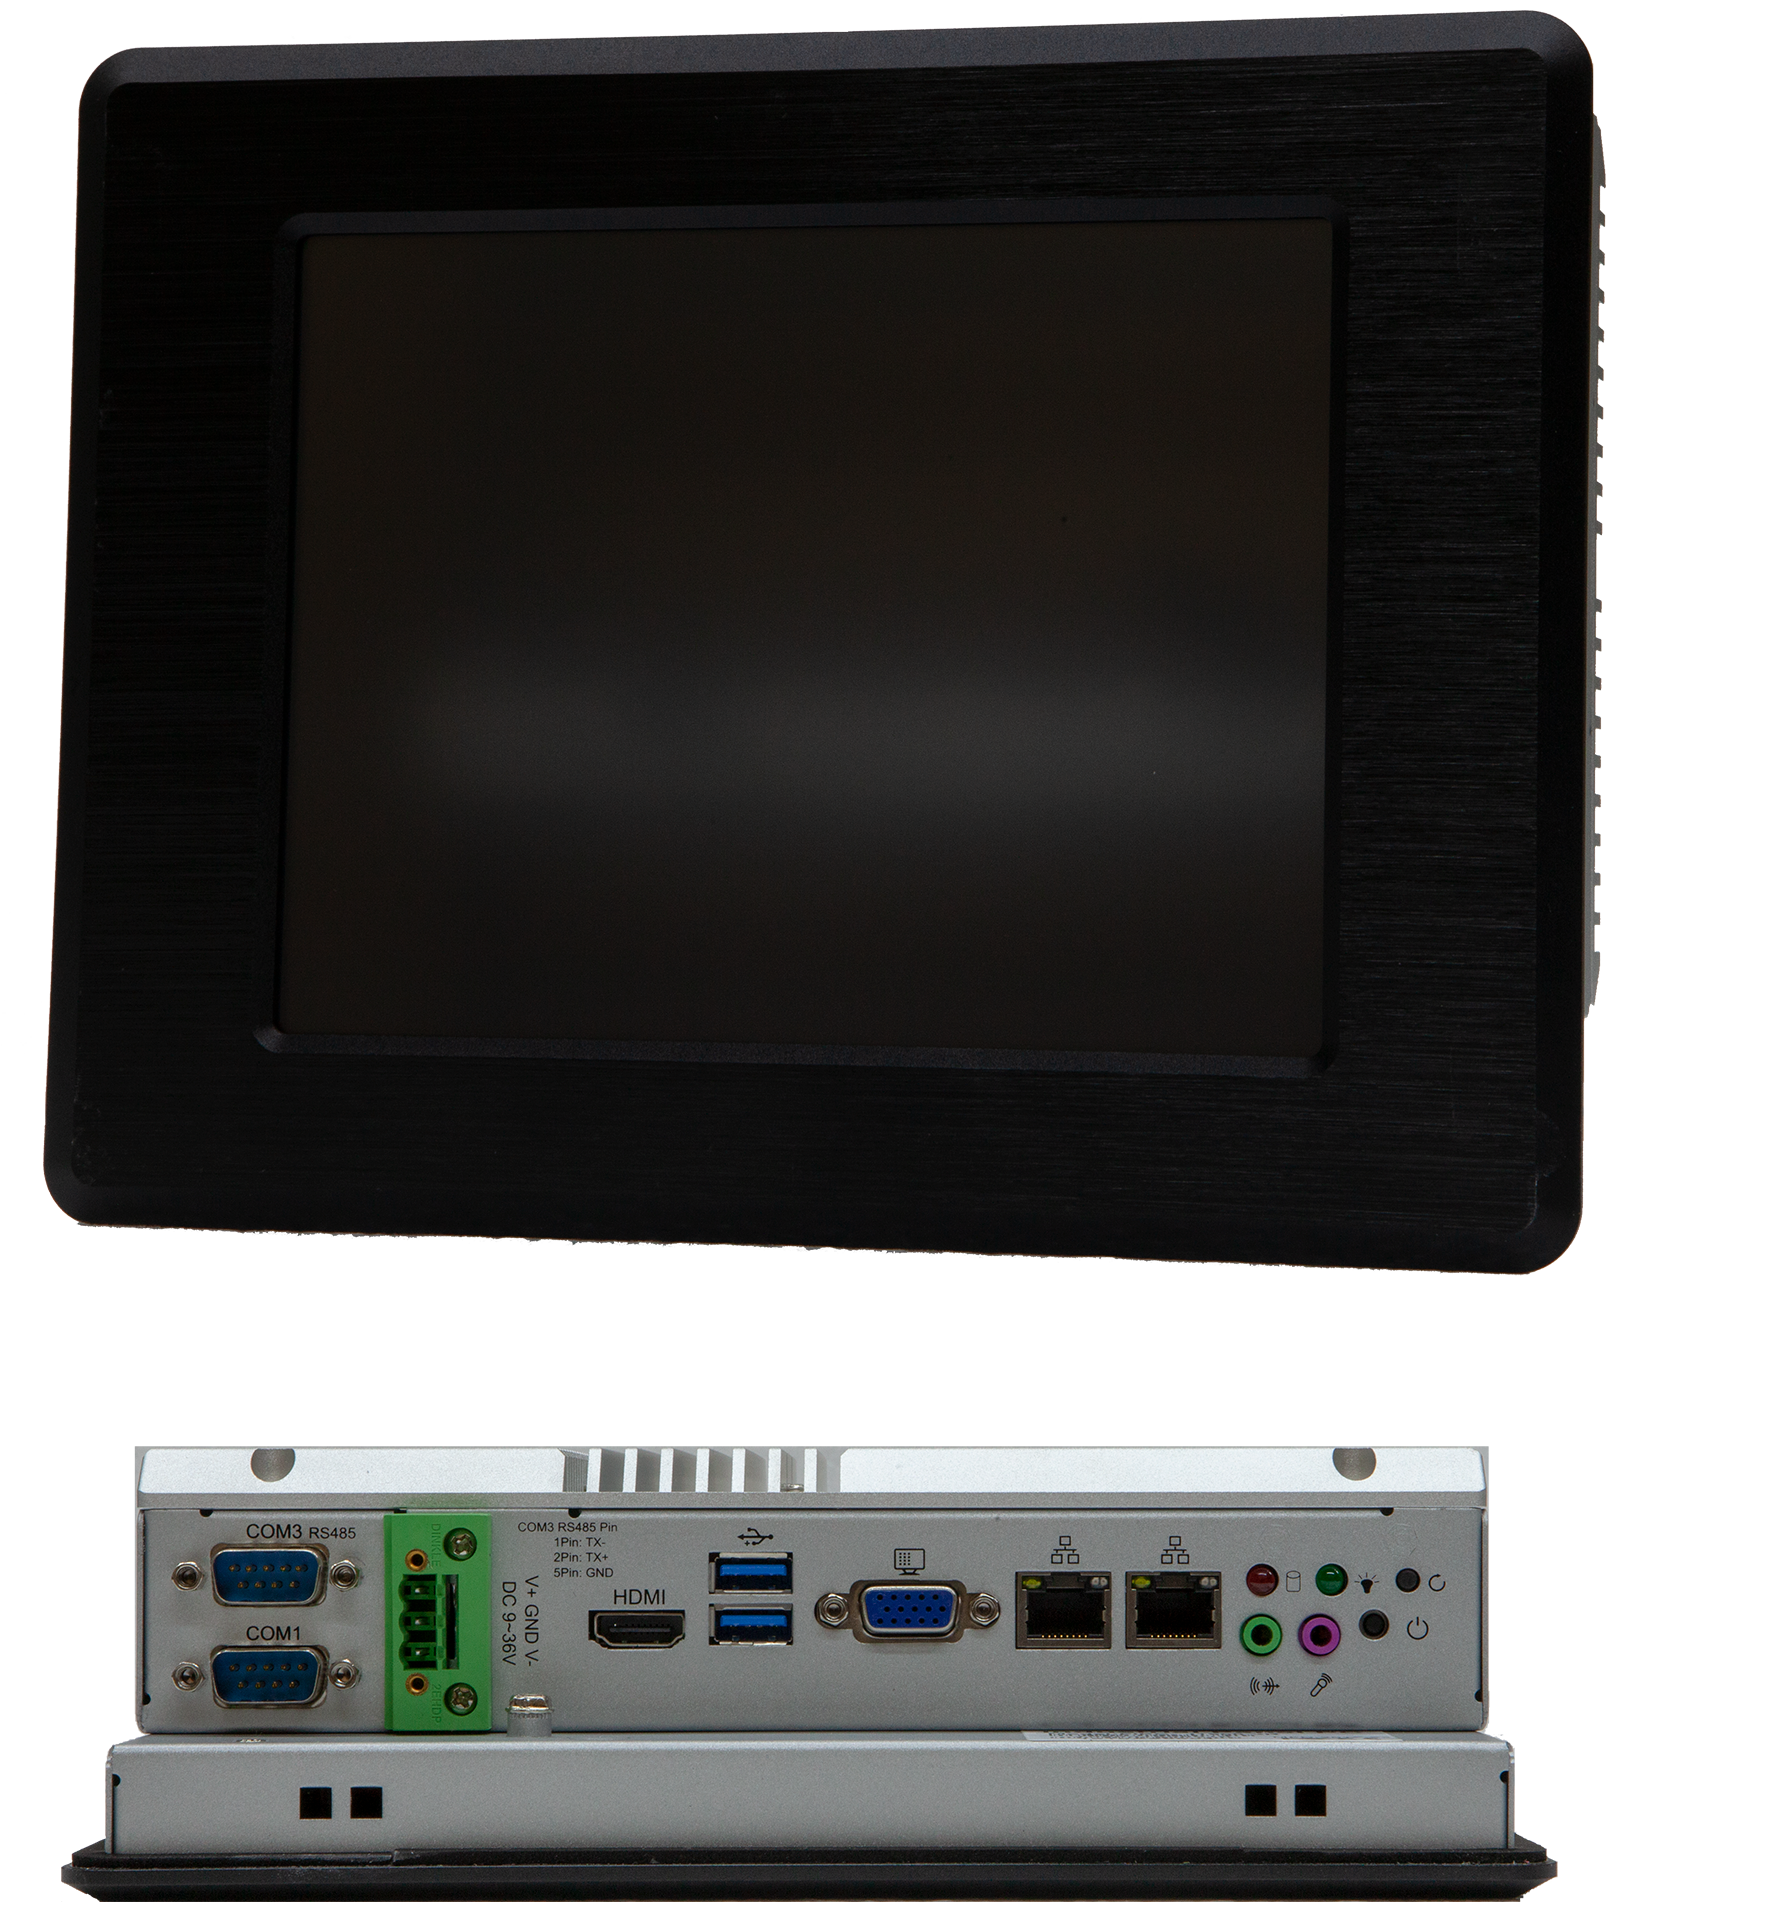 8" Industrial Panel PC With Windows 10 for HMI